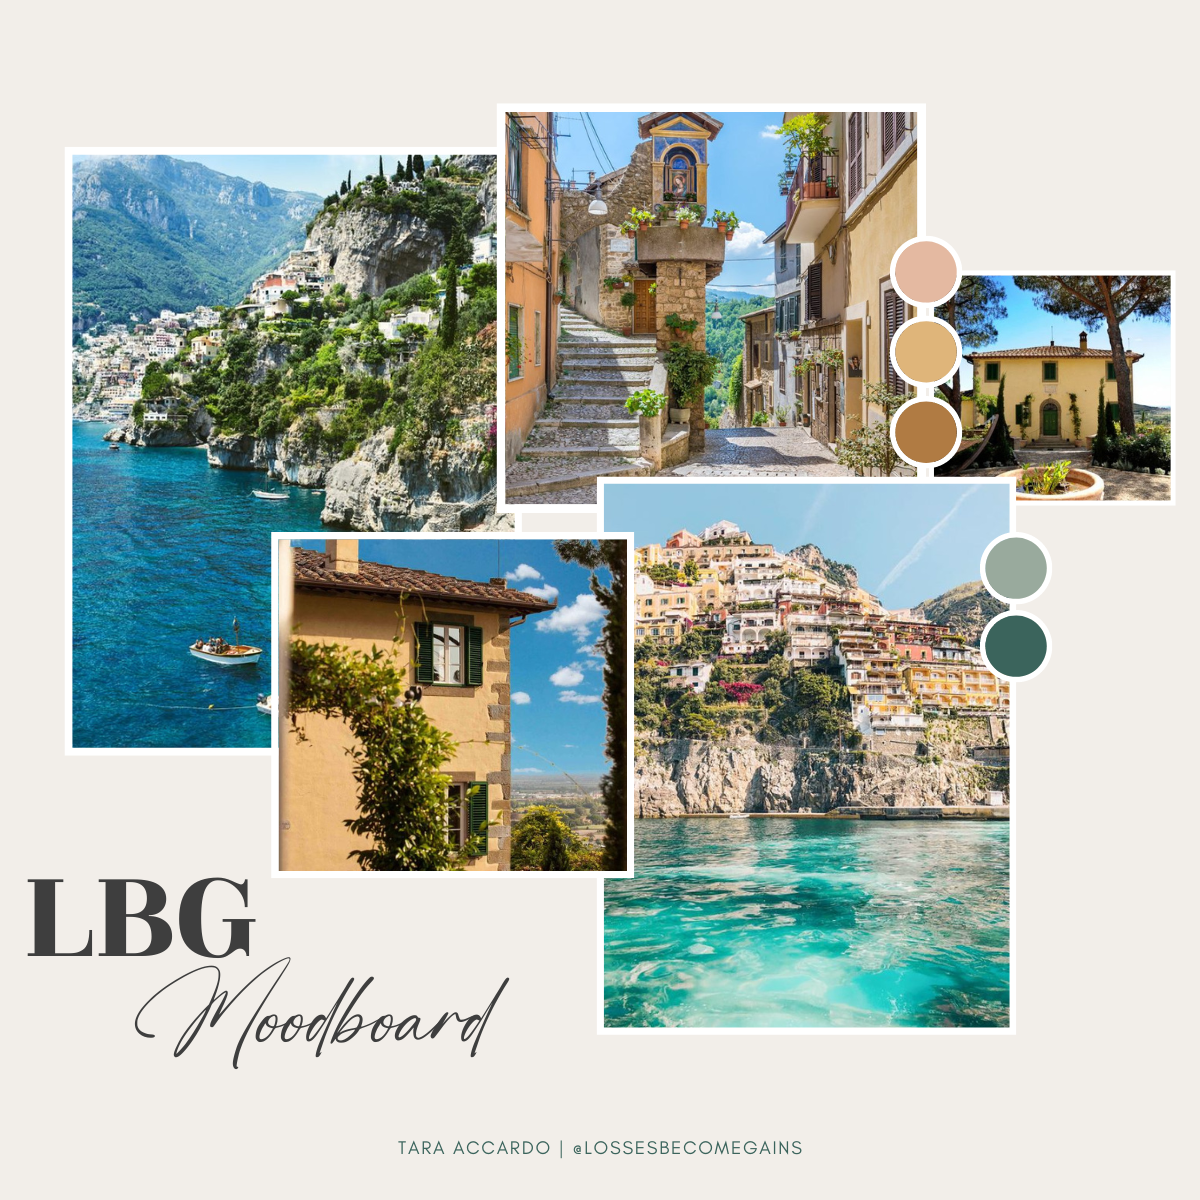 Losses Become Gains mood board, with five colors of Italy architecture and the Italian coast